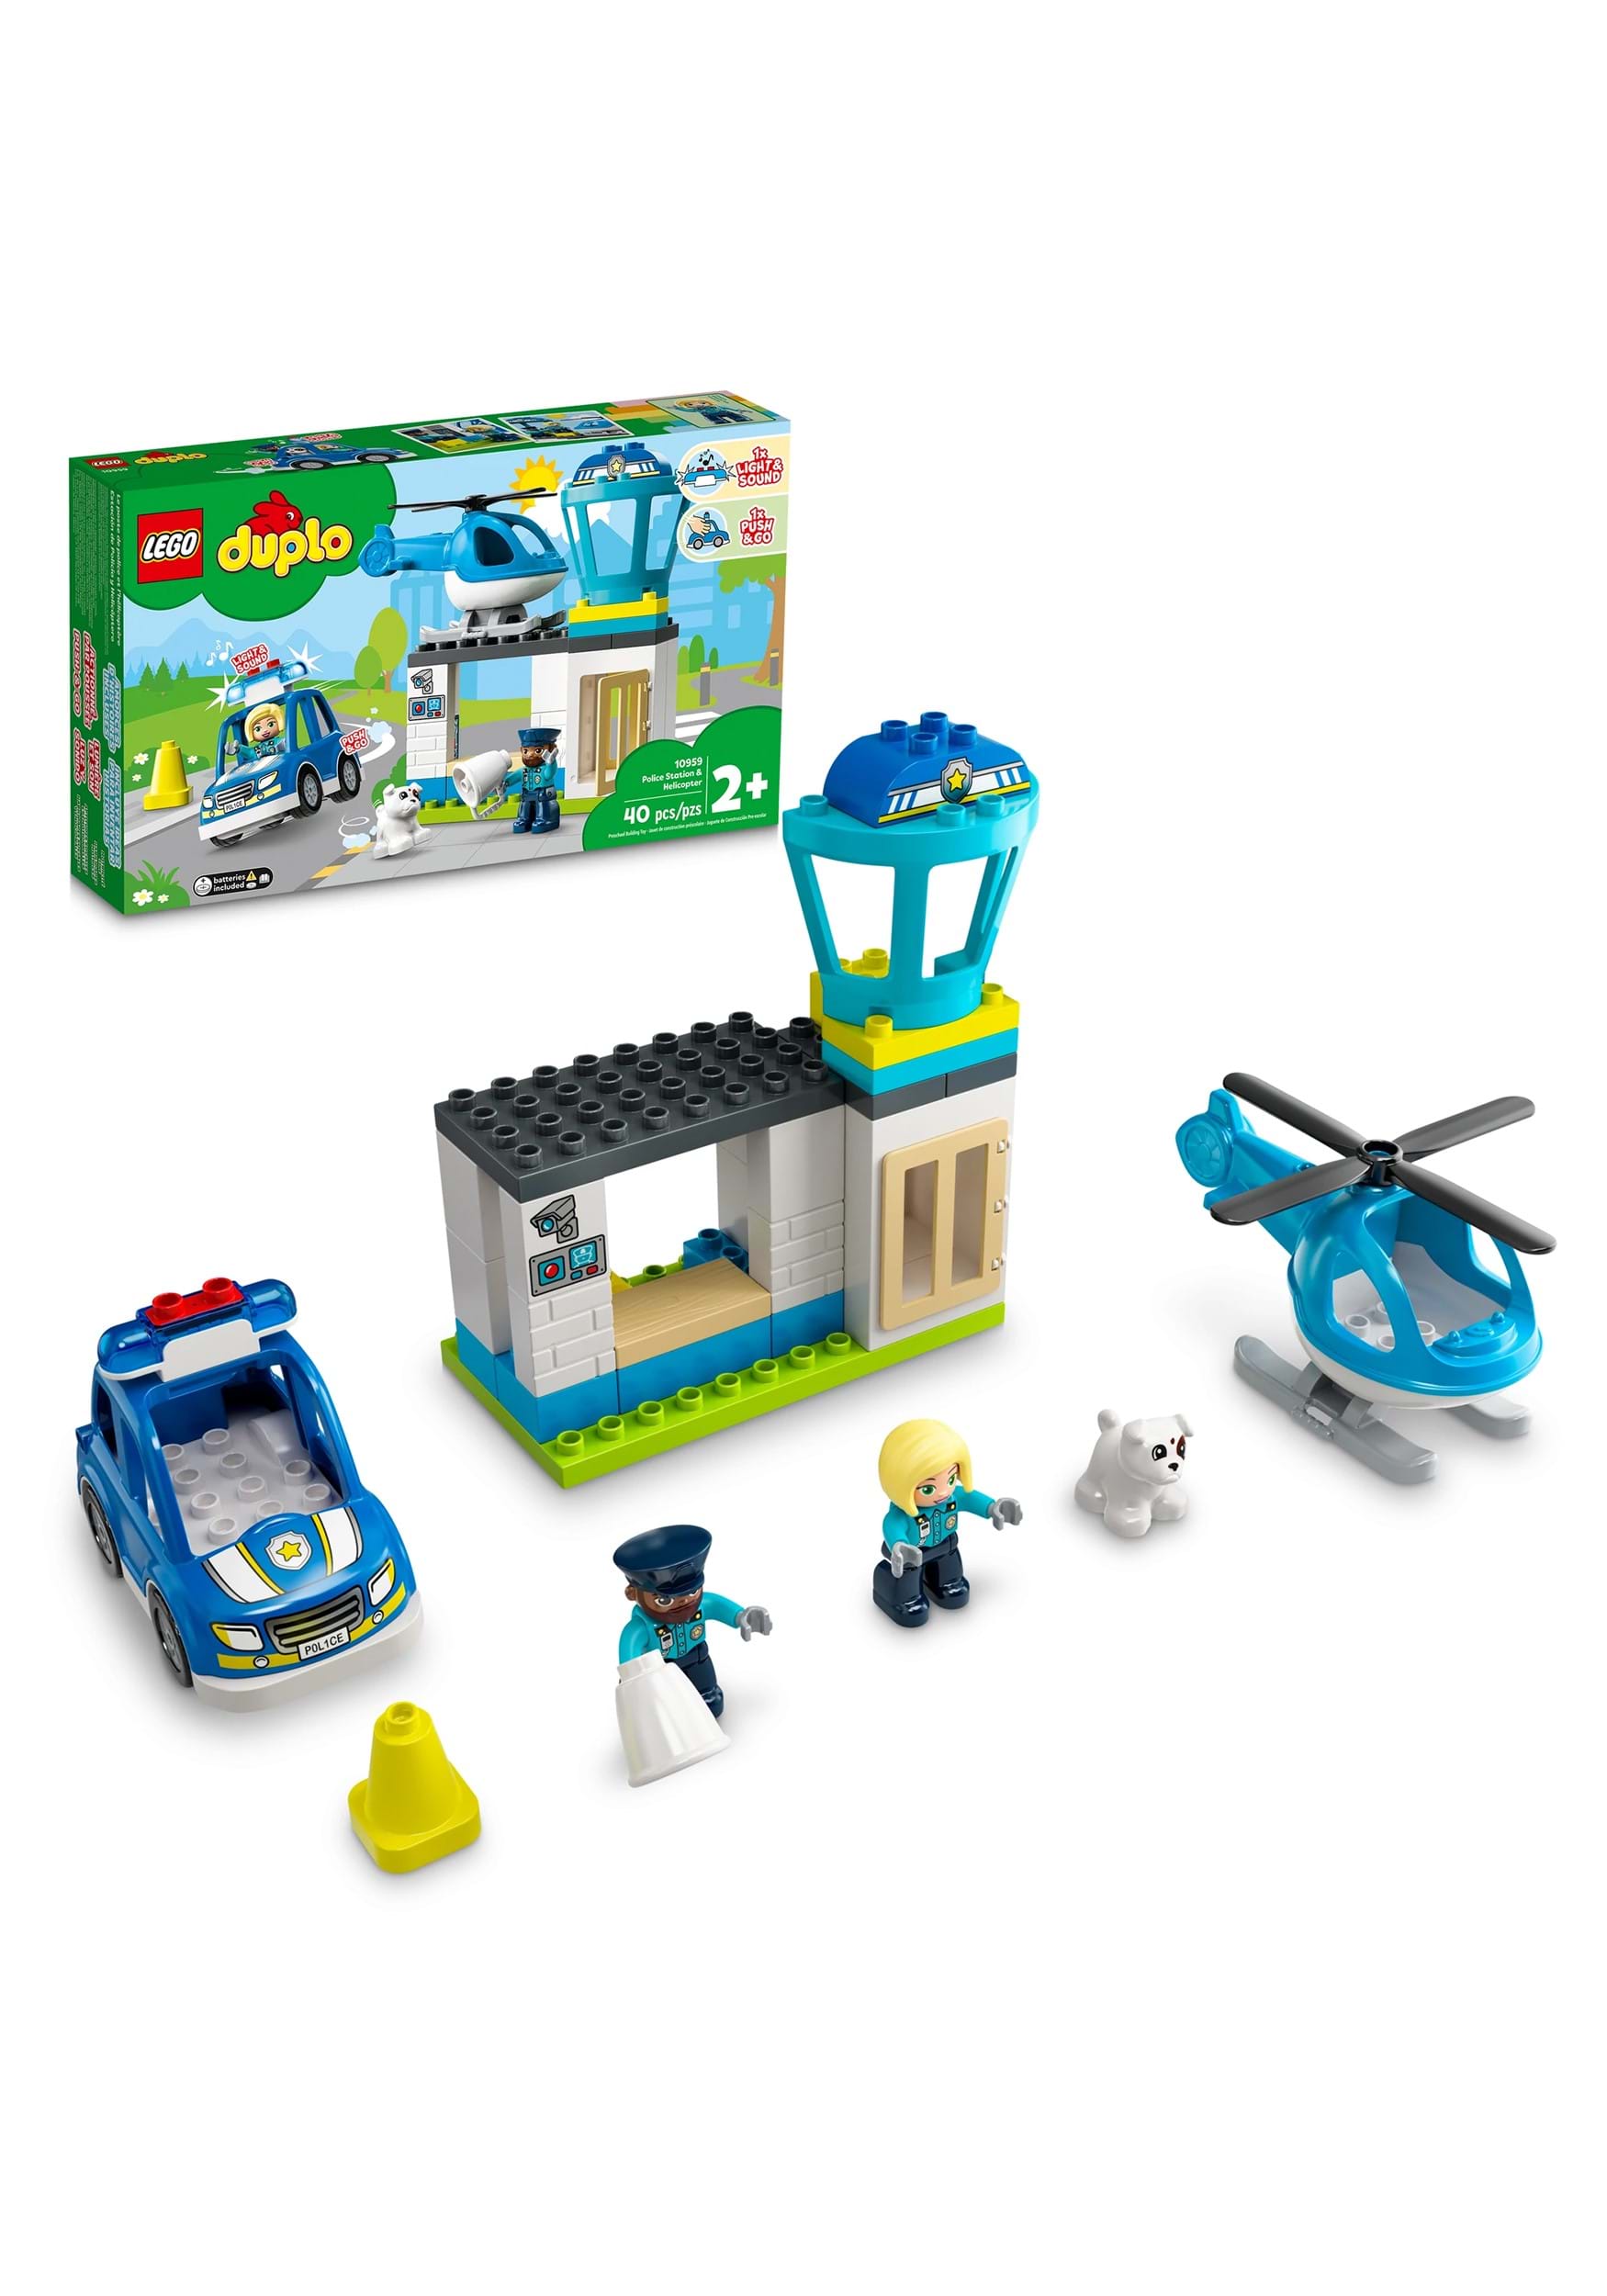 LEGO Duplo Deluxe Police Station & Helicopter Building Set